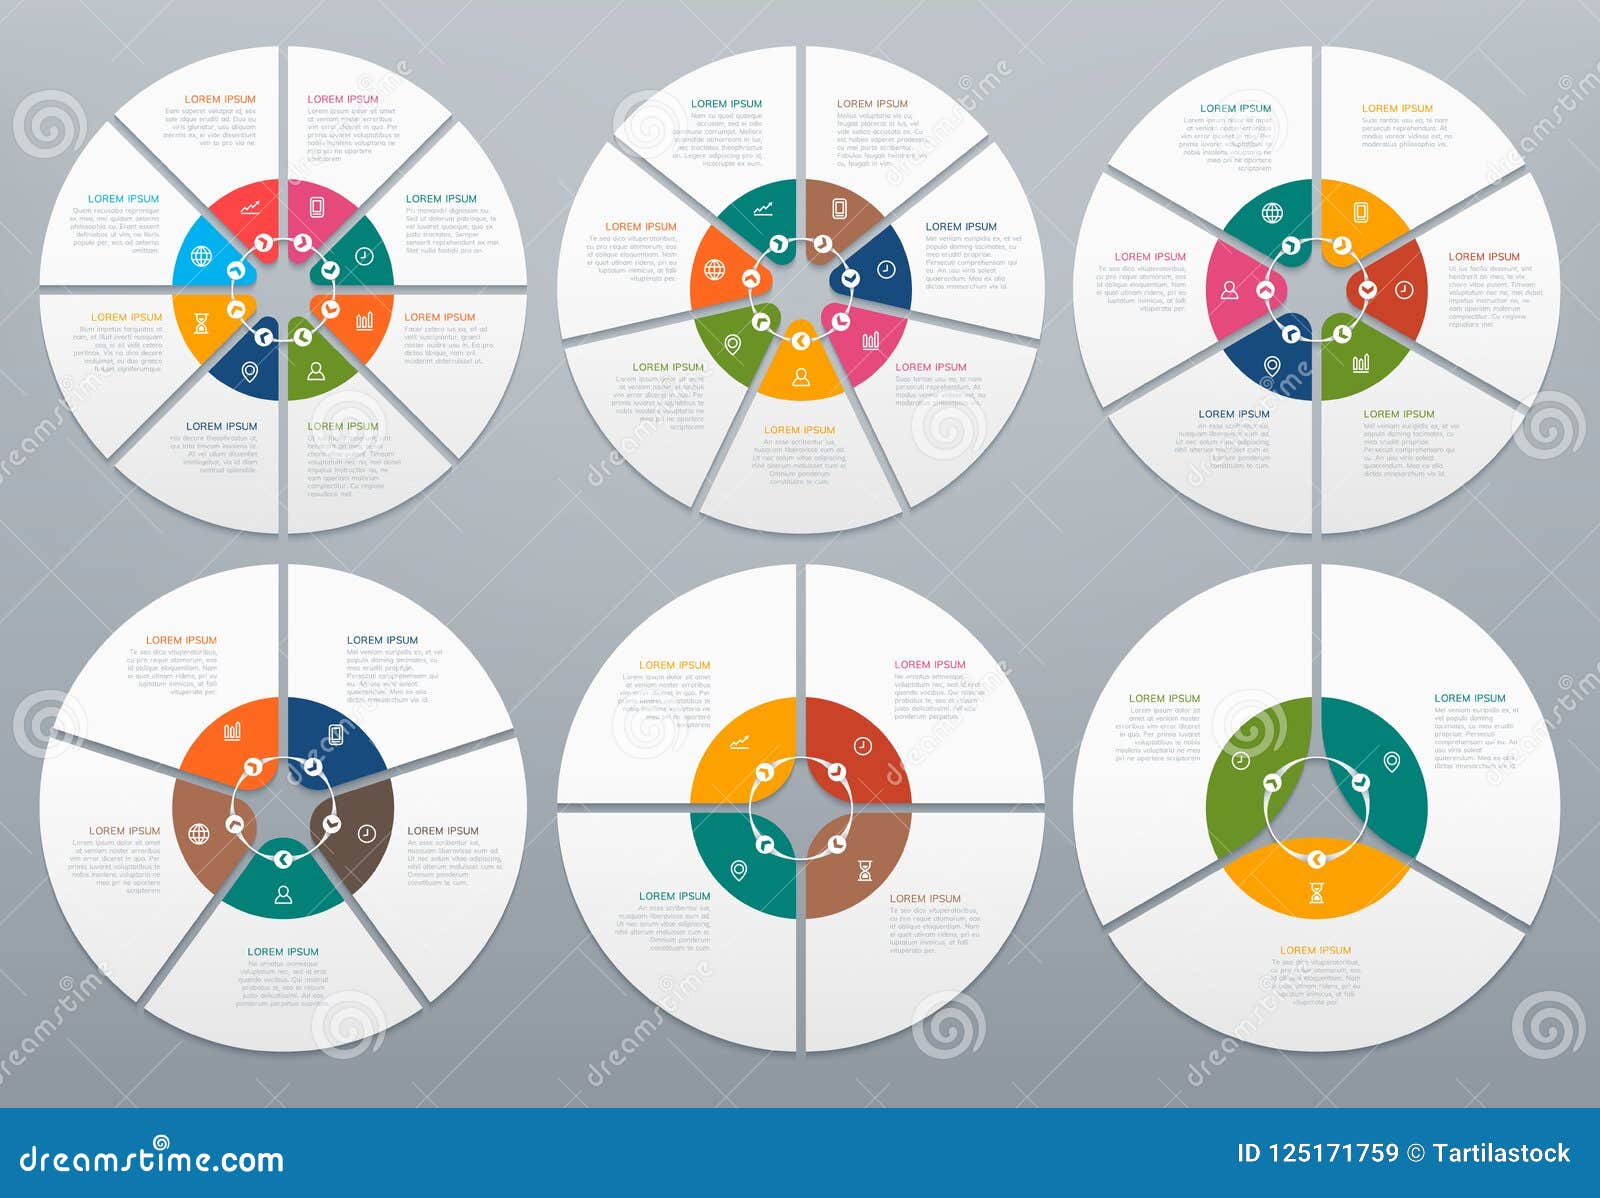 circle infographic. round diagram of process steps, circular chart with arrow. circles and arrows graph charts 